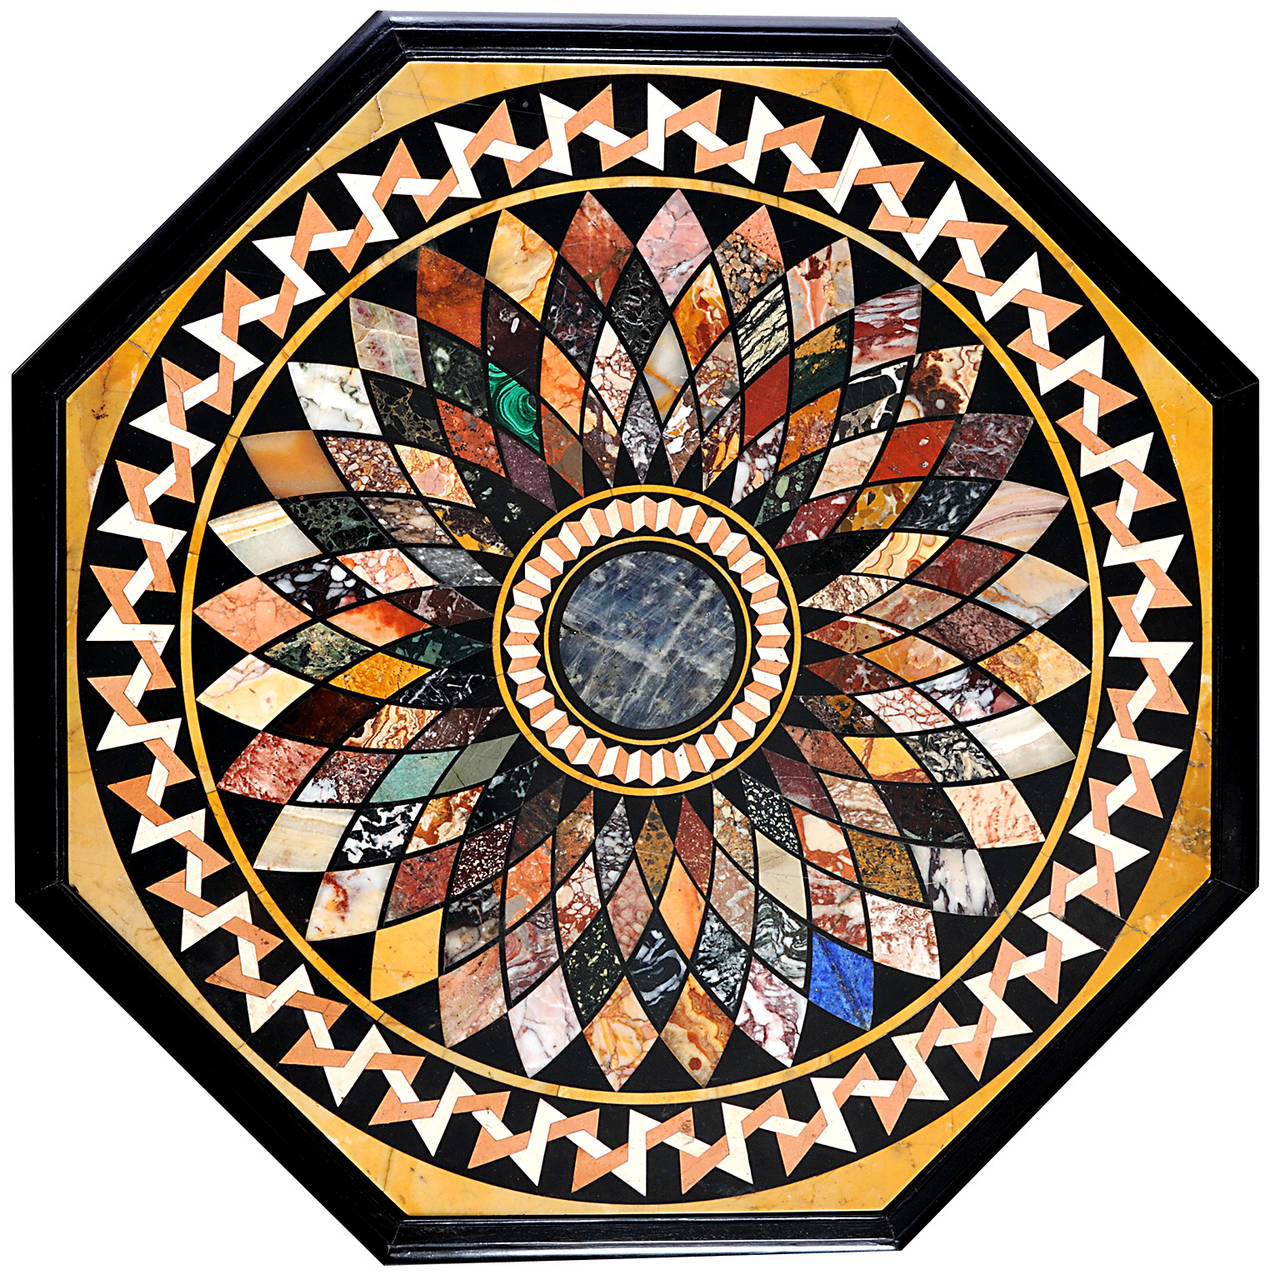 The inlaid marble top, circa 1820-1830; the Sinhalese ebony base of a similar date.

From the 18th century there was a insatiable demand for Italian inlaid marble table-tops, often carefully assembled from ancient fragments, thus perpetuating the